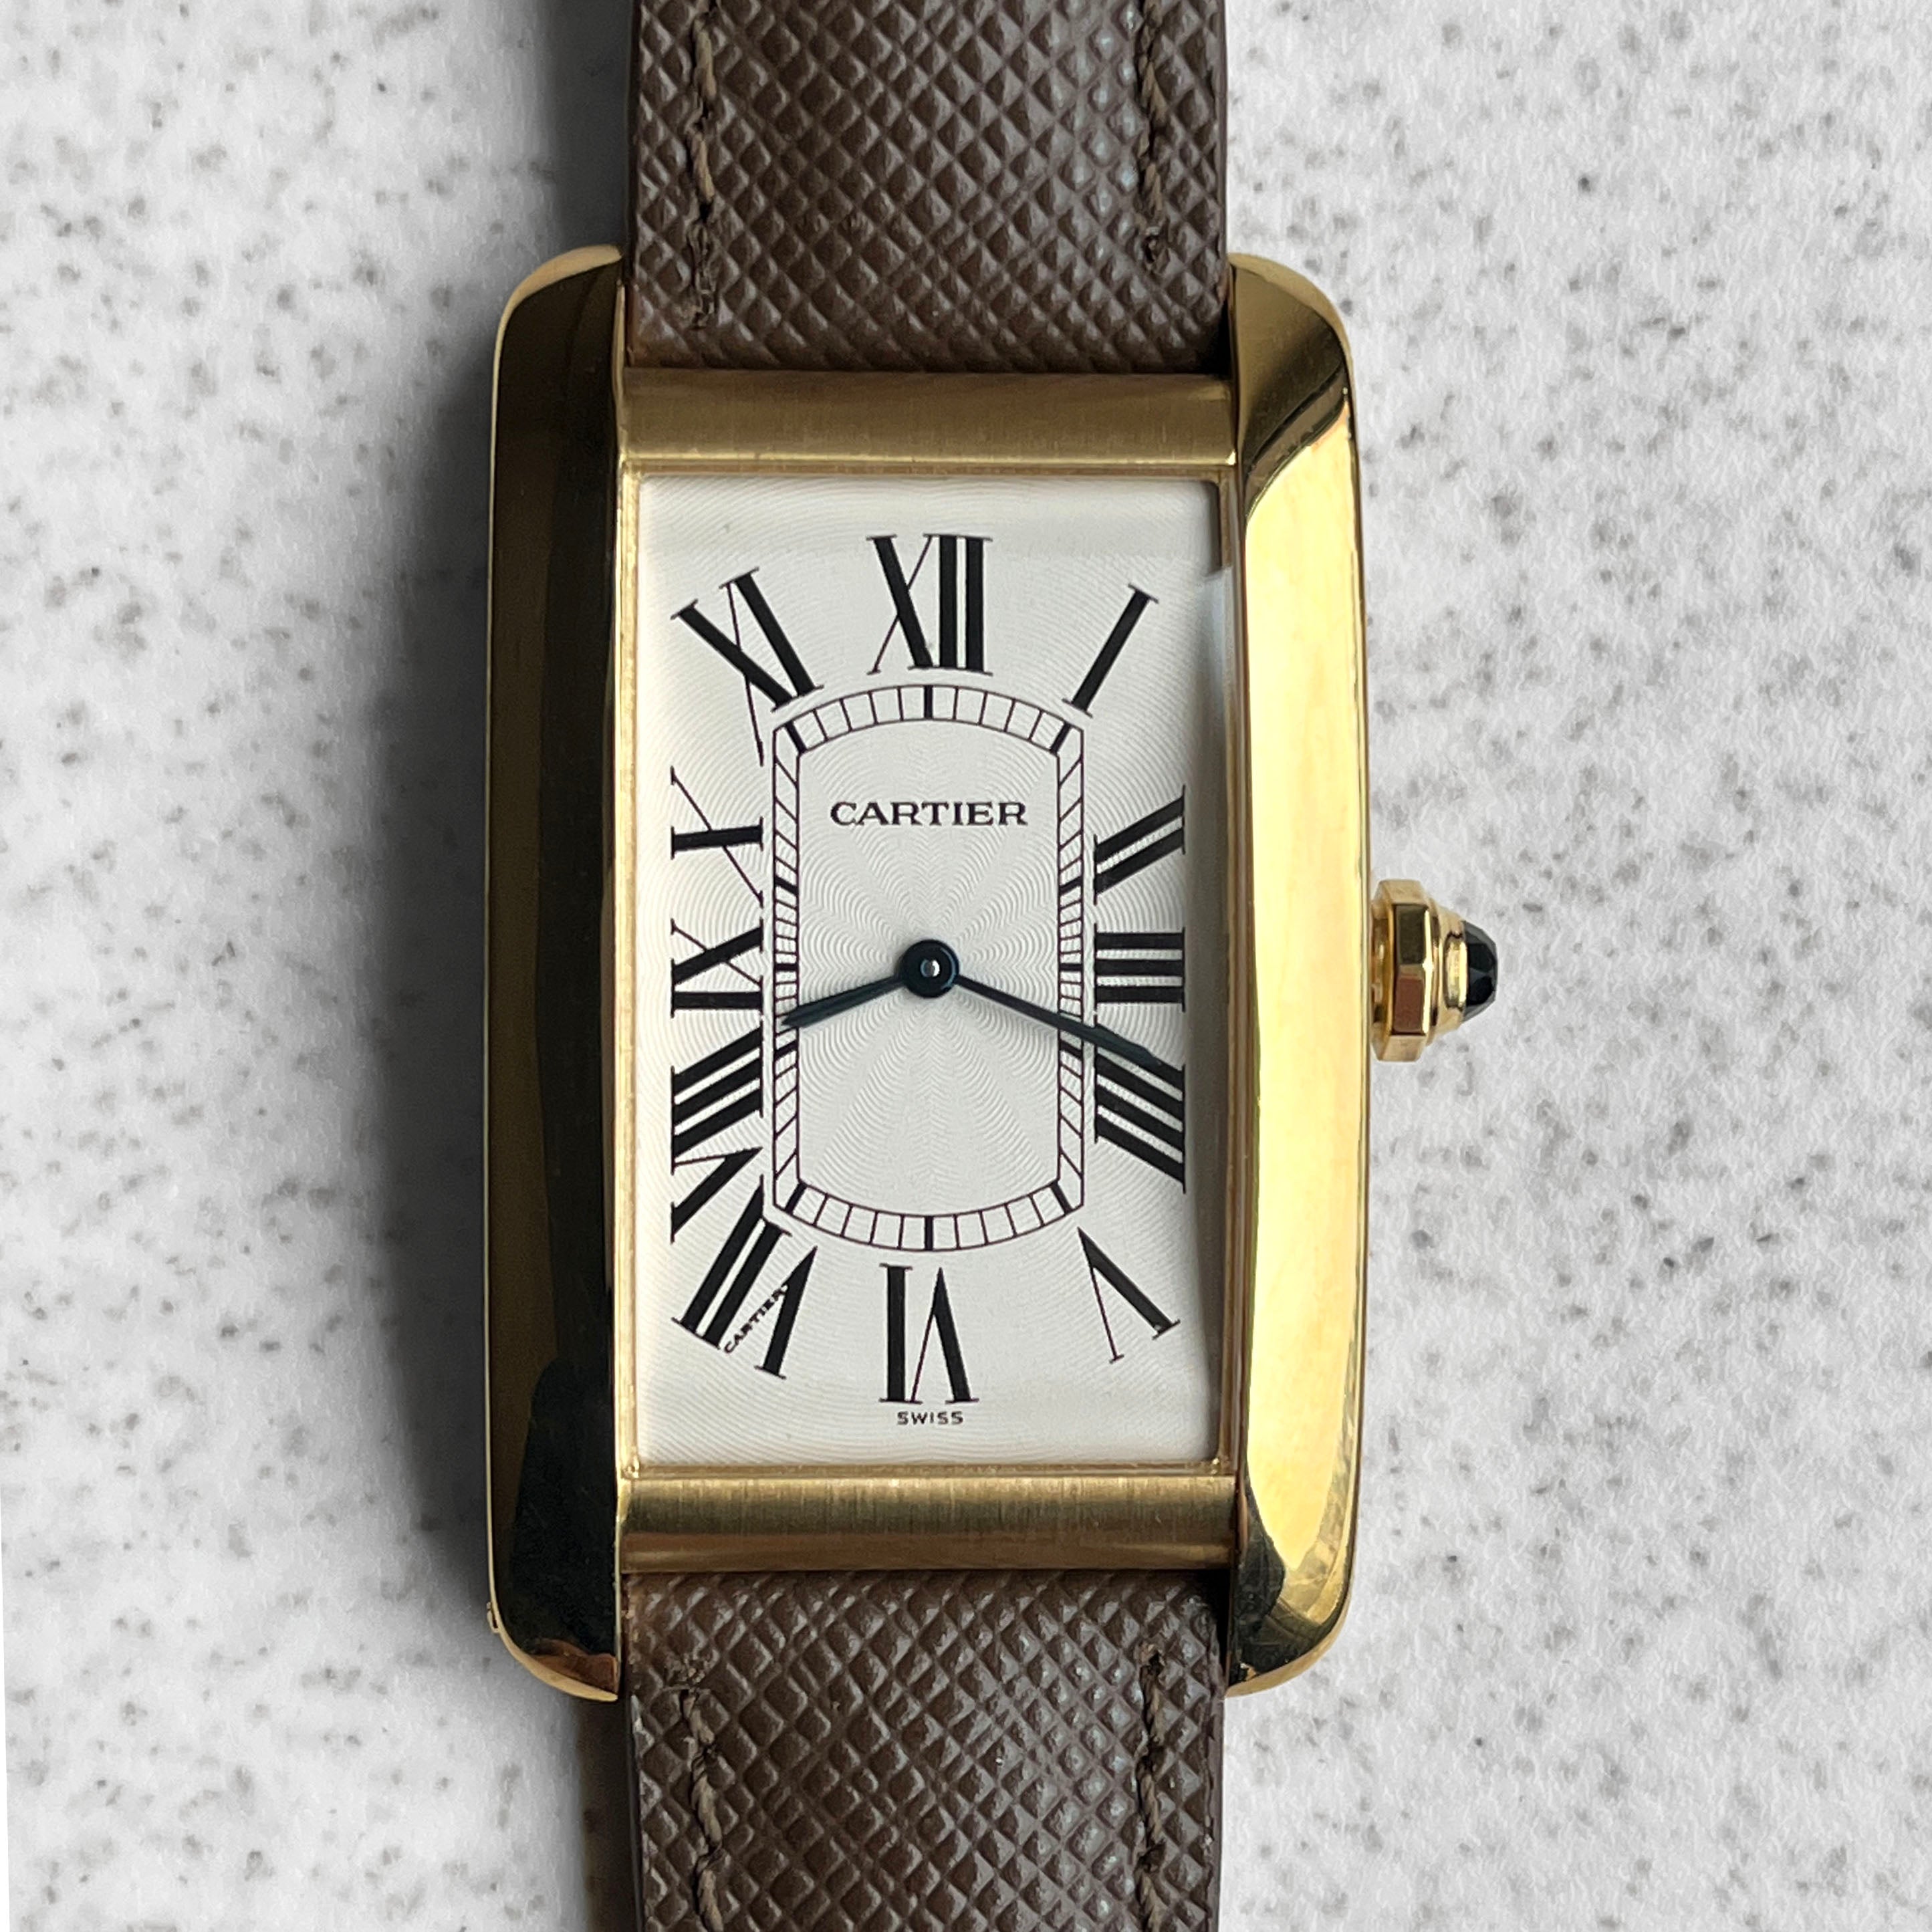 Cartier 1735 Tank Americaine 1735 Collection Privee 18K Yellow